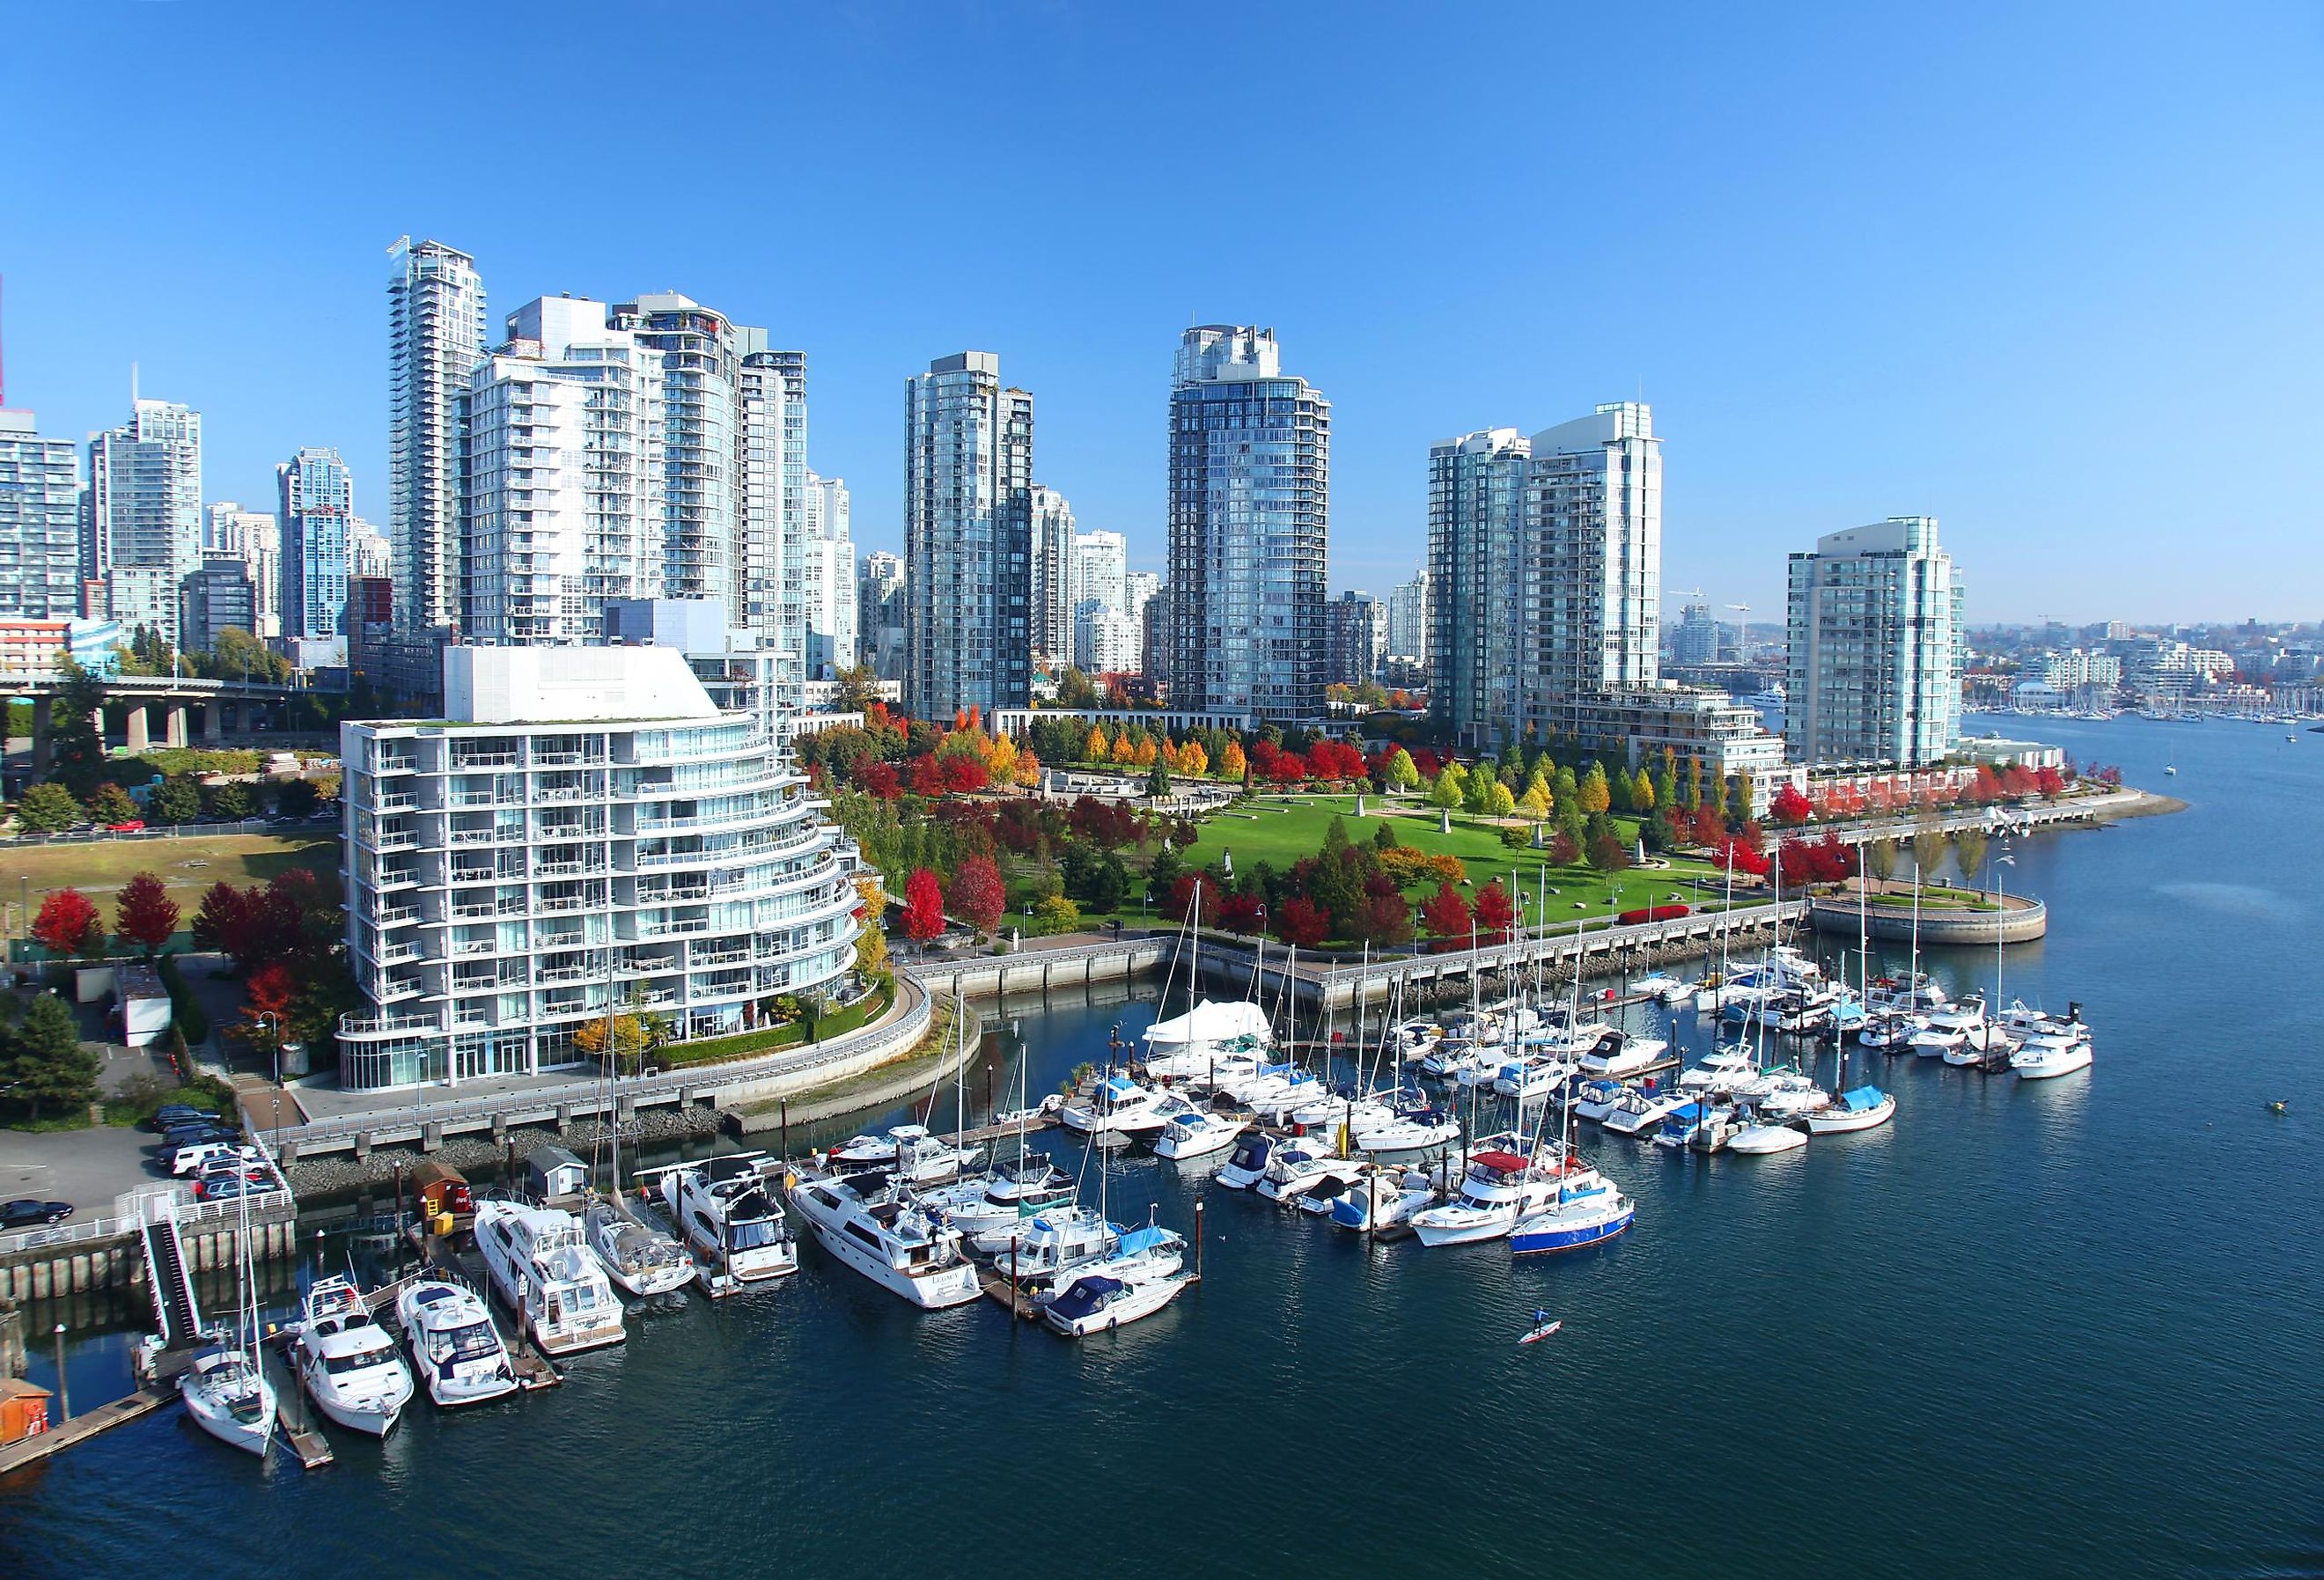 The gorgeous city of Vancouver on the Pacific coast.